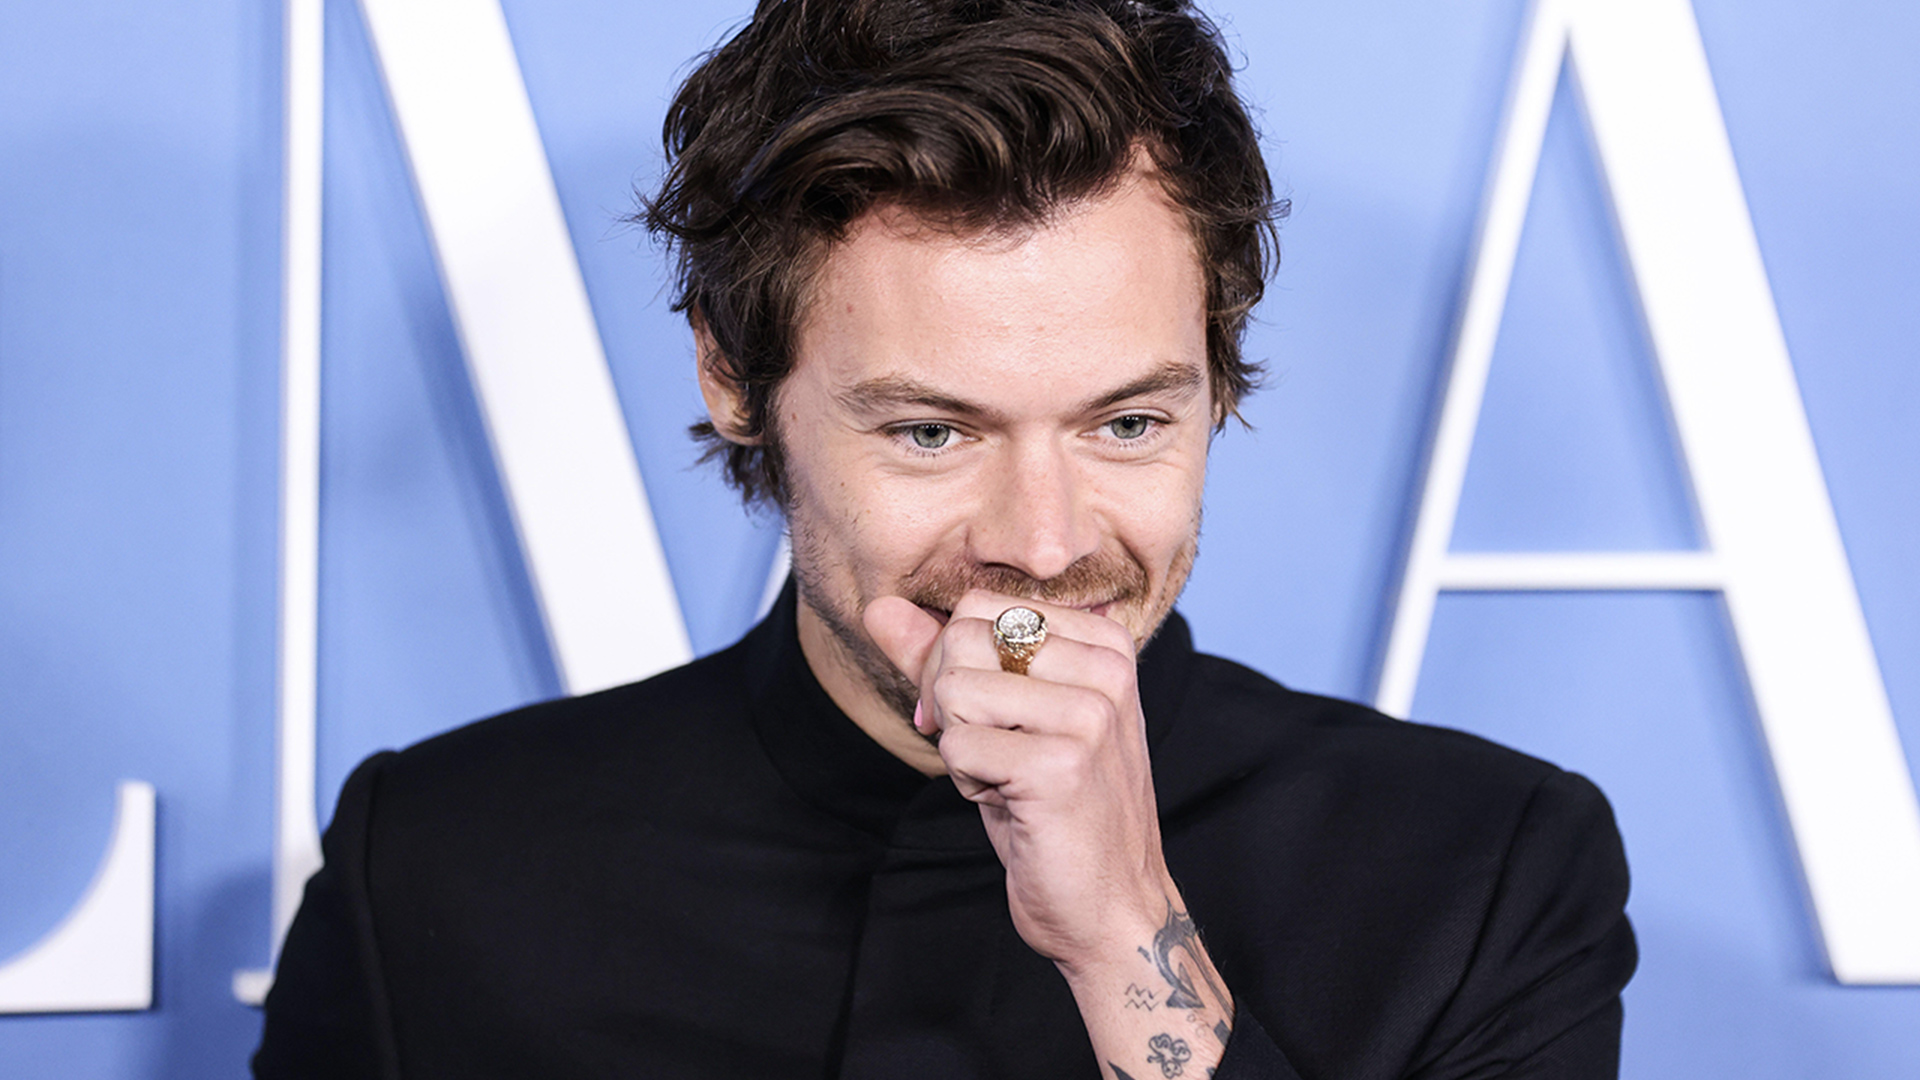 Harry Styles with his hand to his mouth in a fist, as if he's covering a cough with a blue background